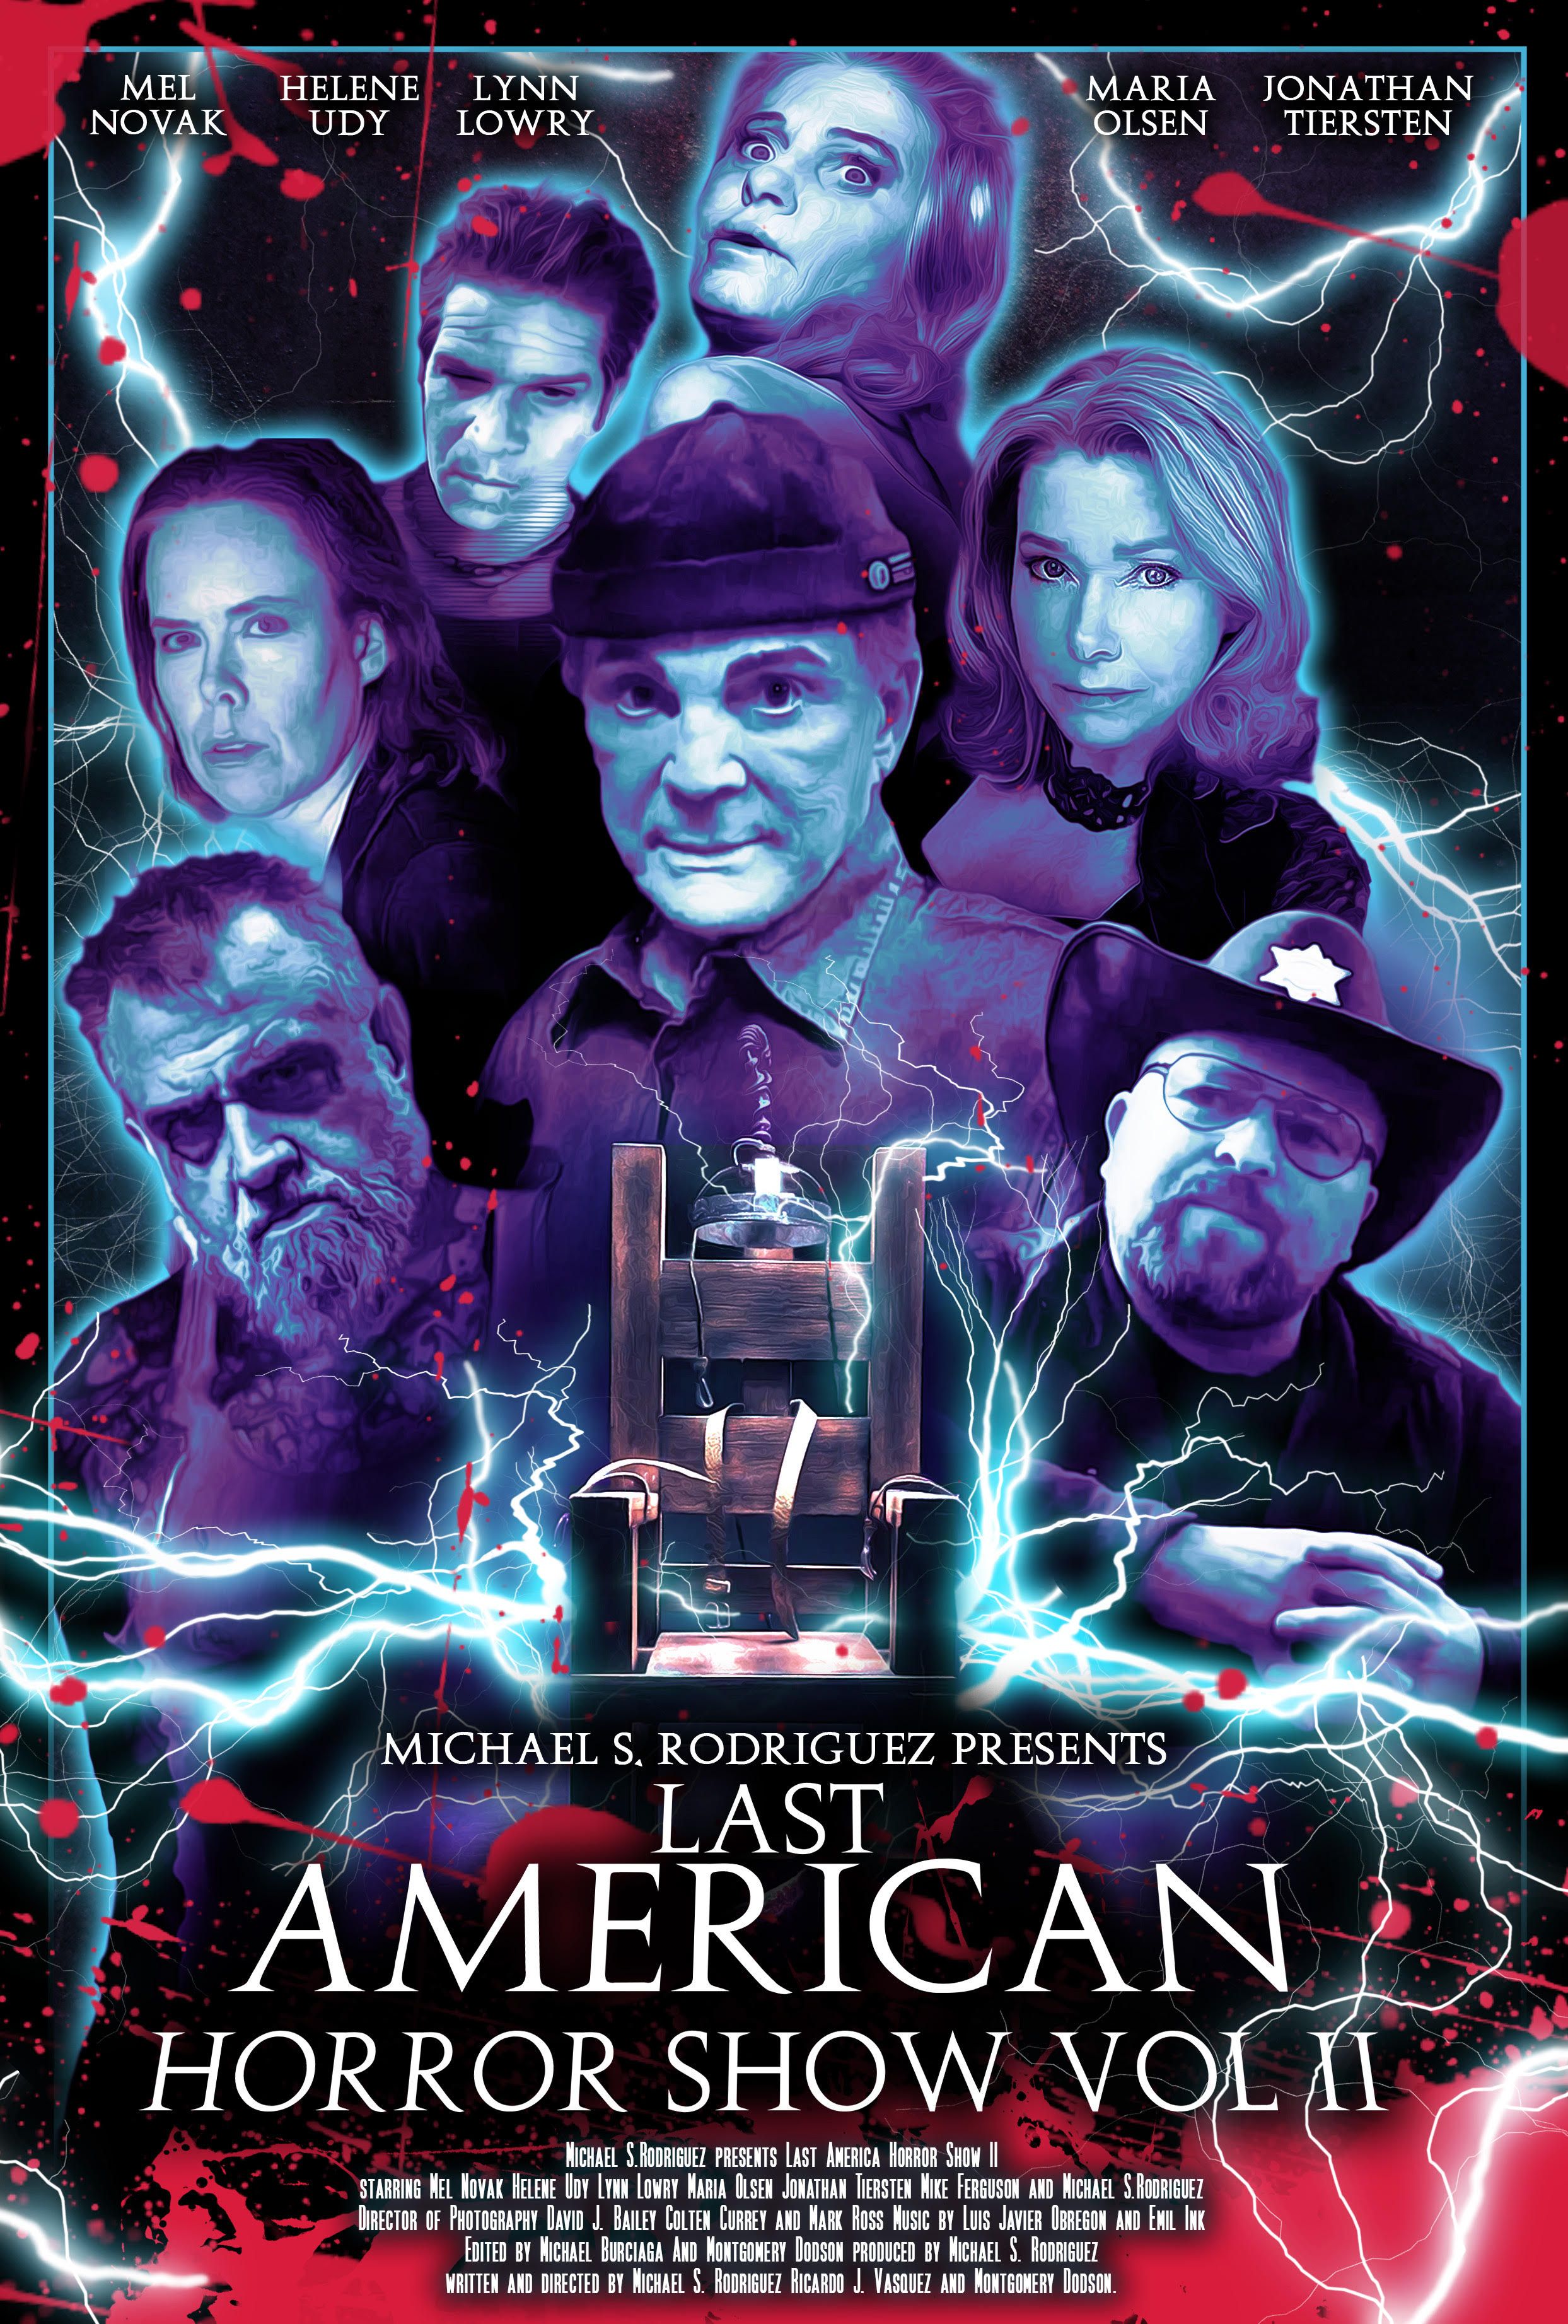 Last American Horror Show: Volume II 2022 Hindi Unofficial Dubbed 1xBet